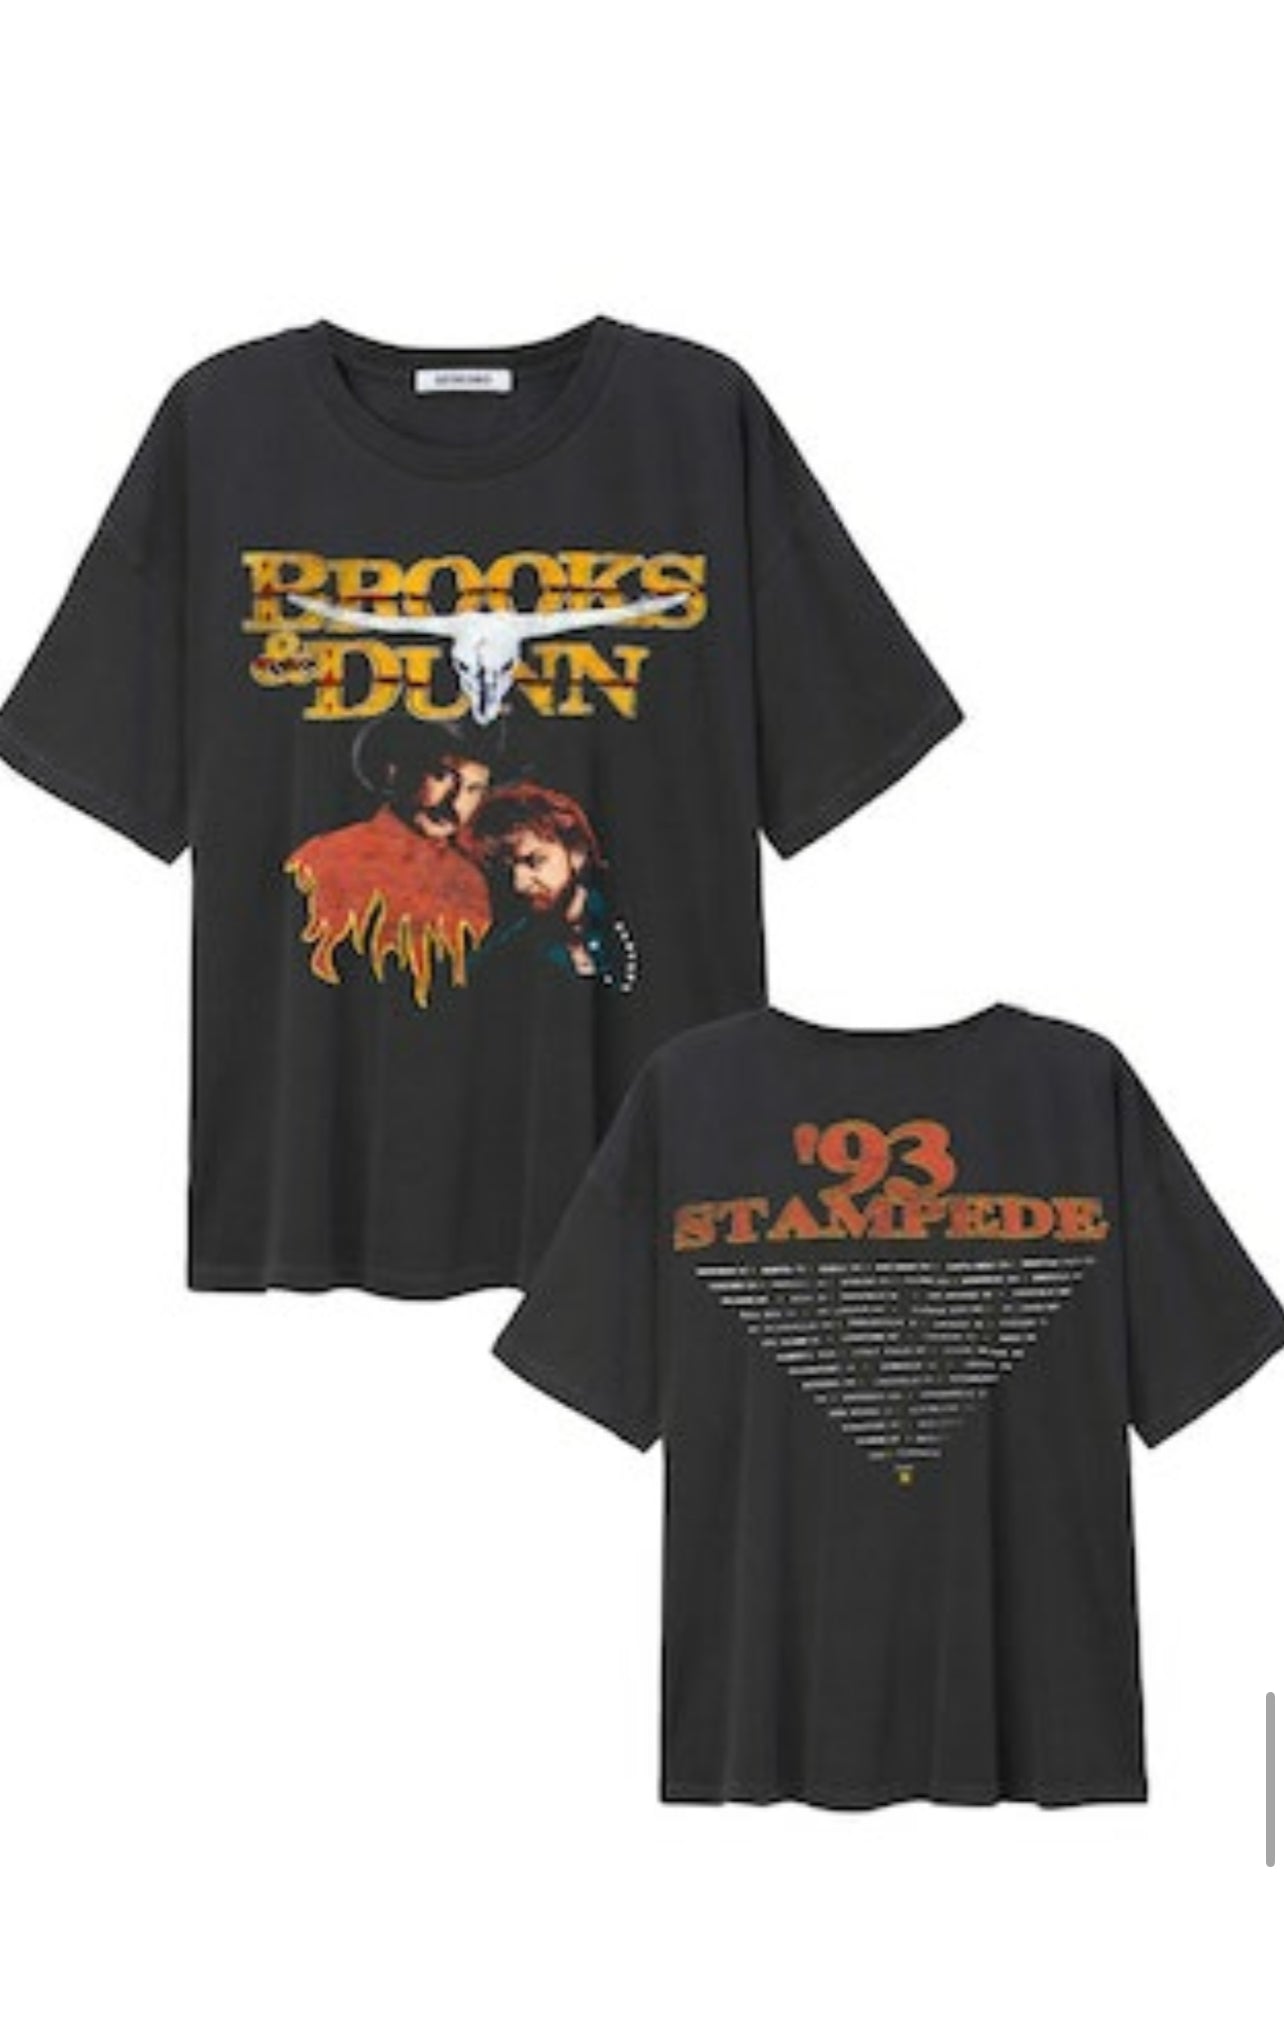 Brooks and Dunn stampede merch tee